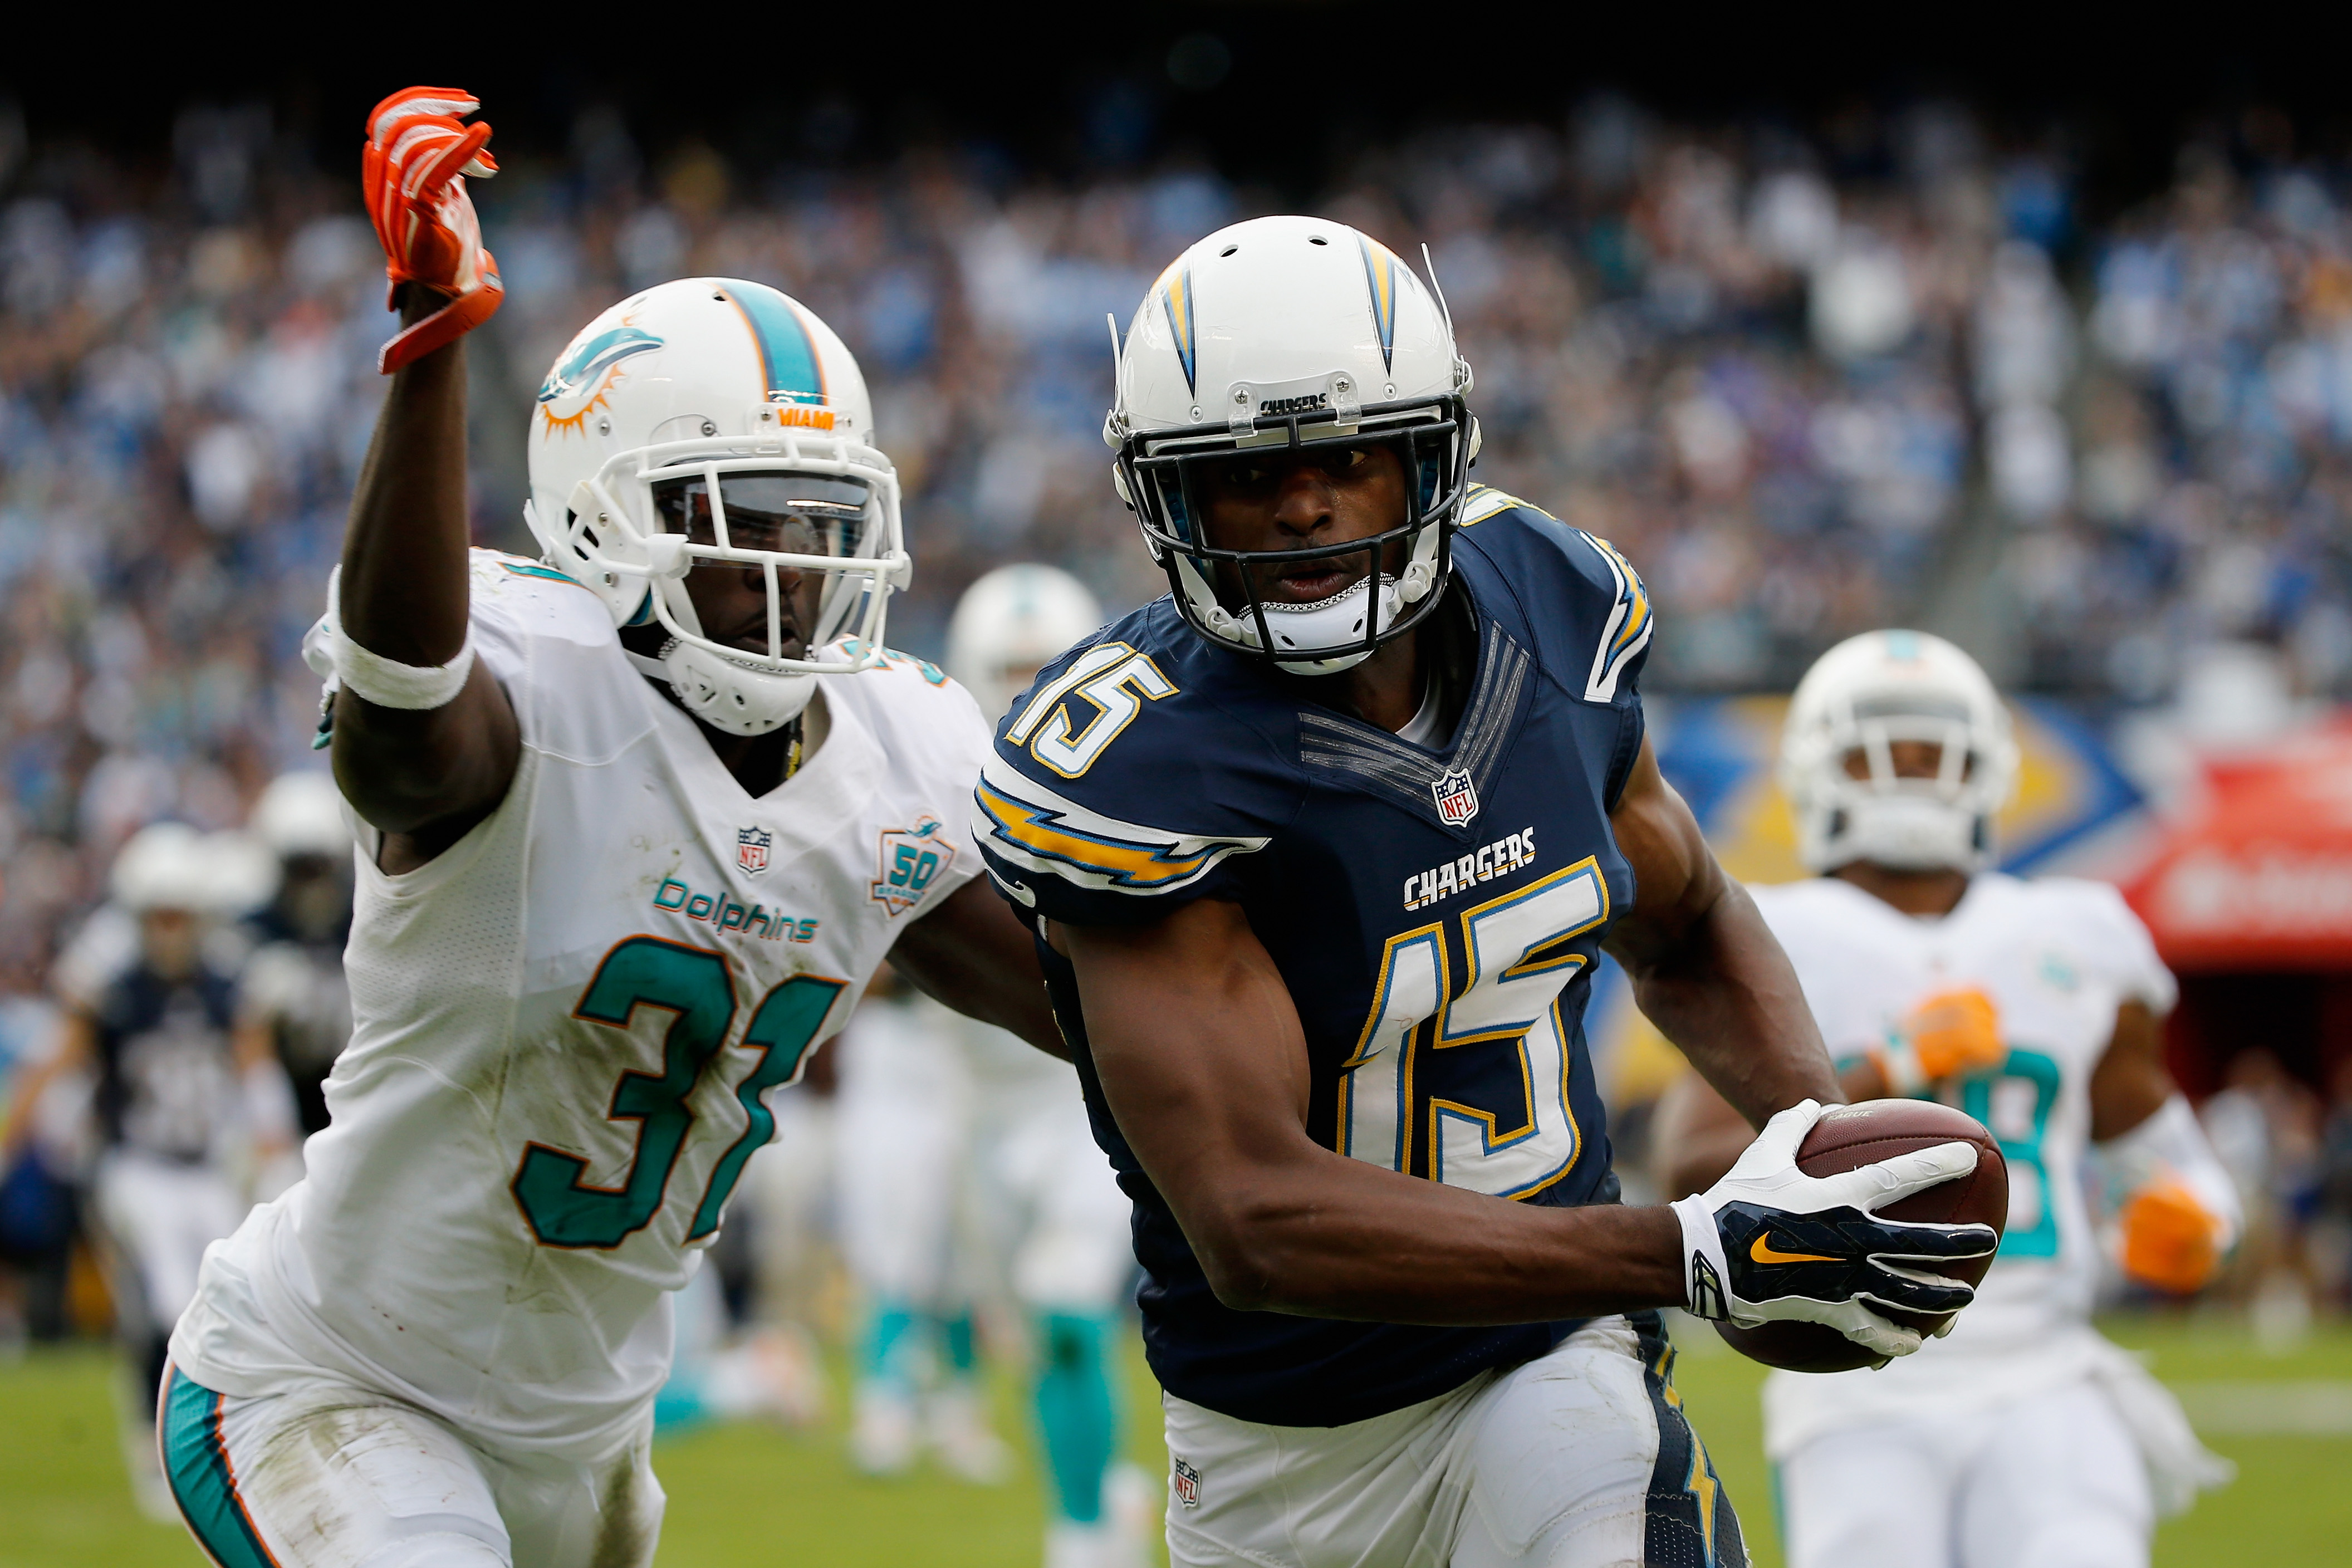 Dolphins vs Chargers: Preview, score prediction for Week 2